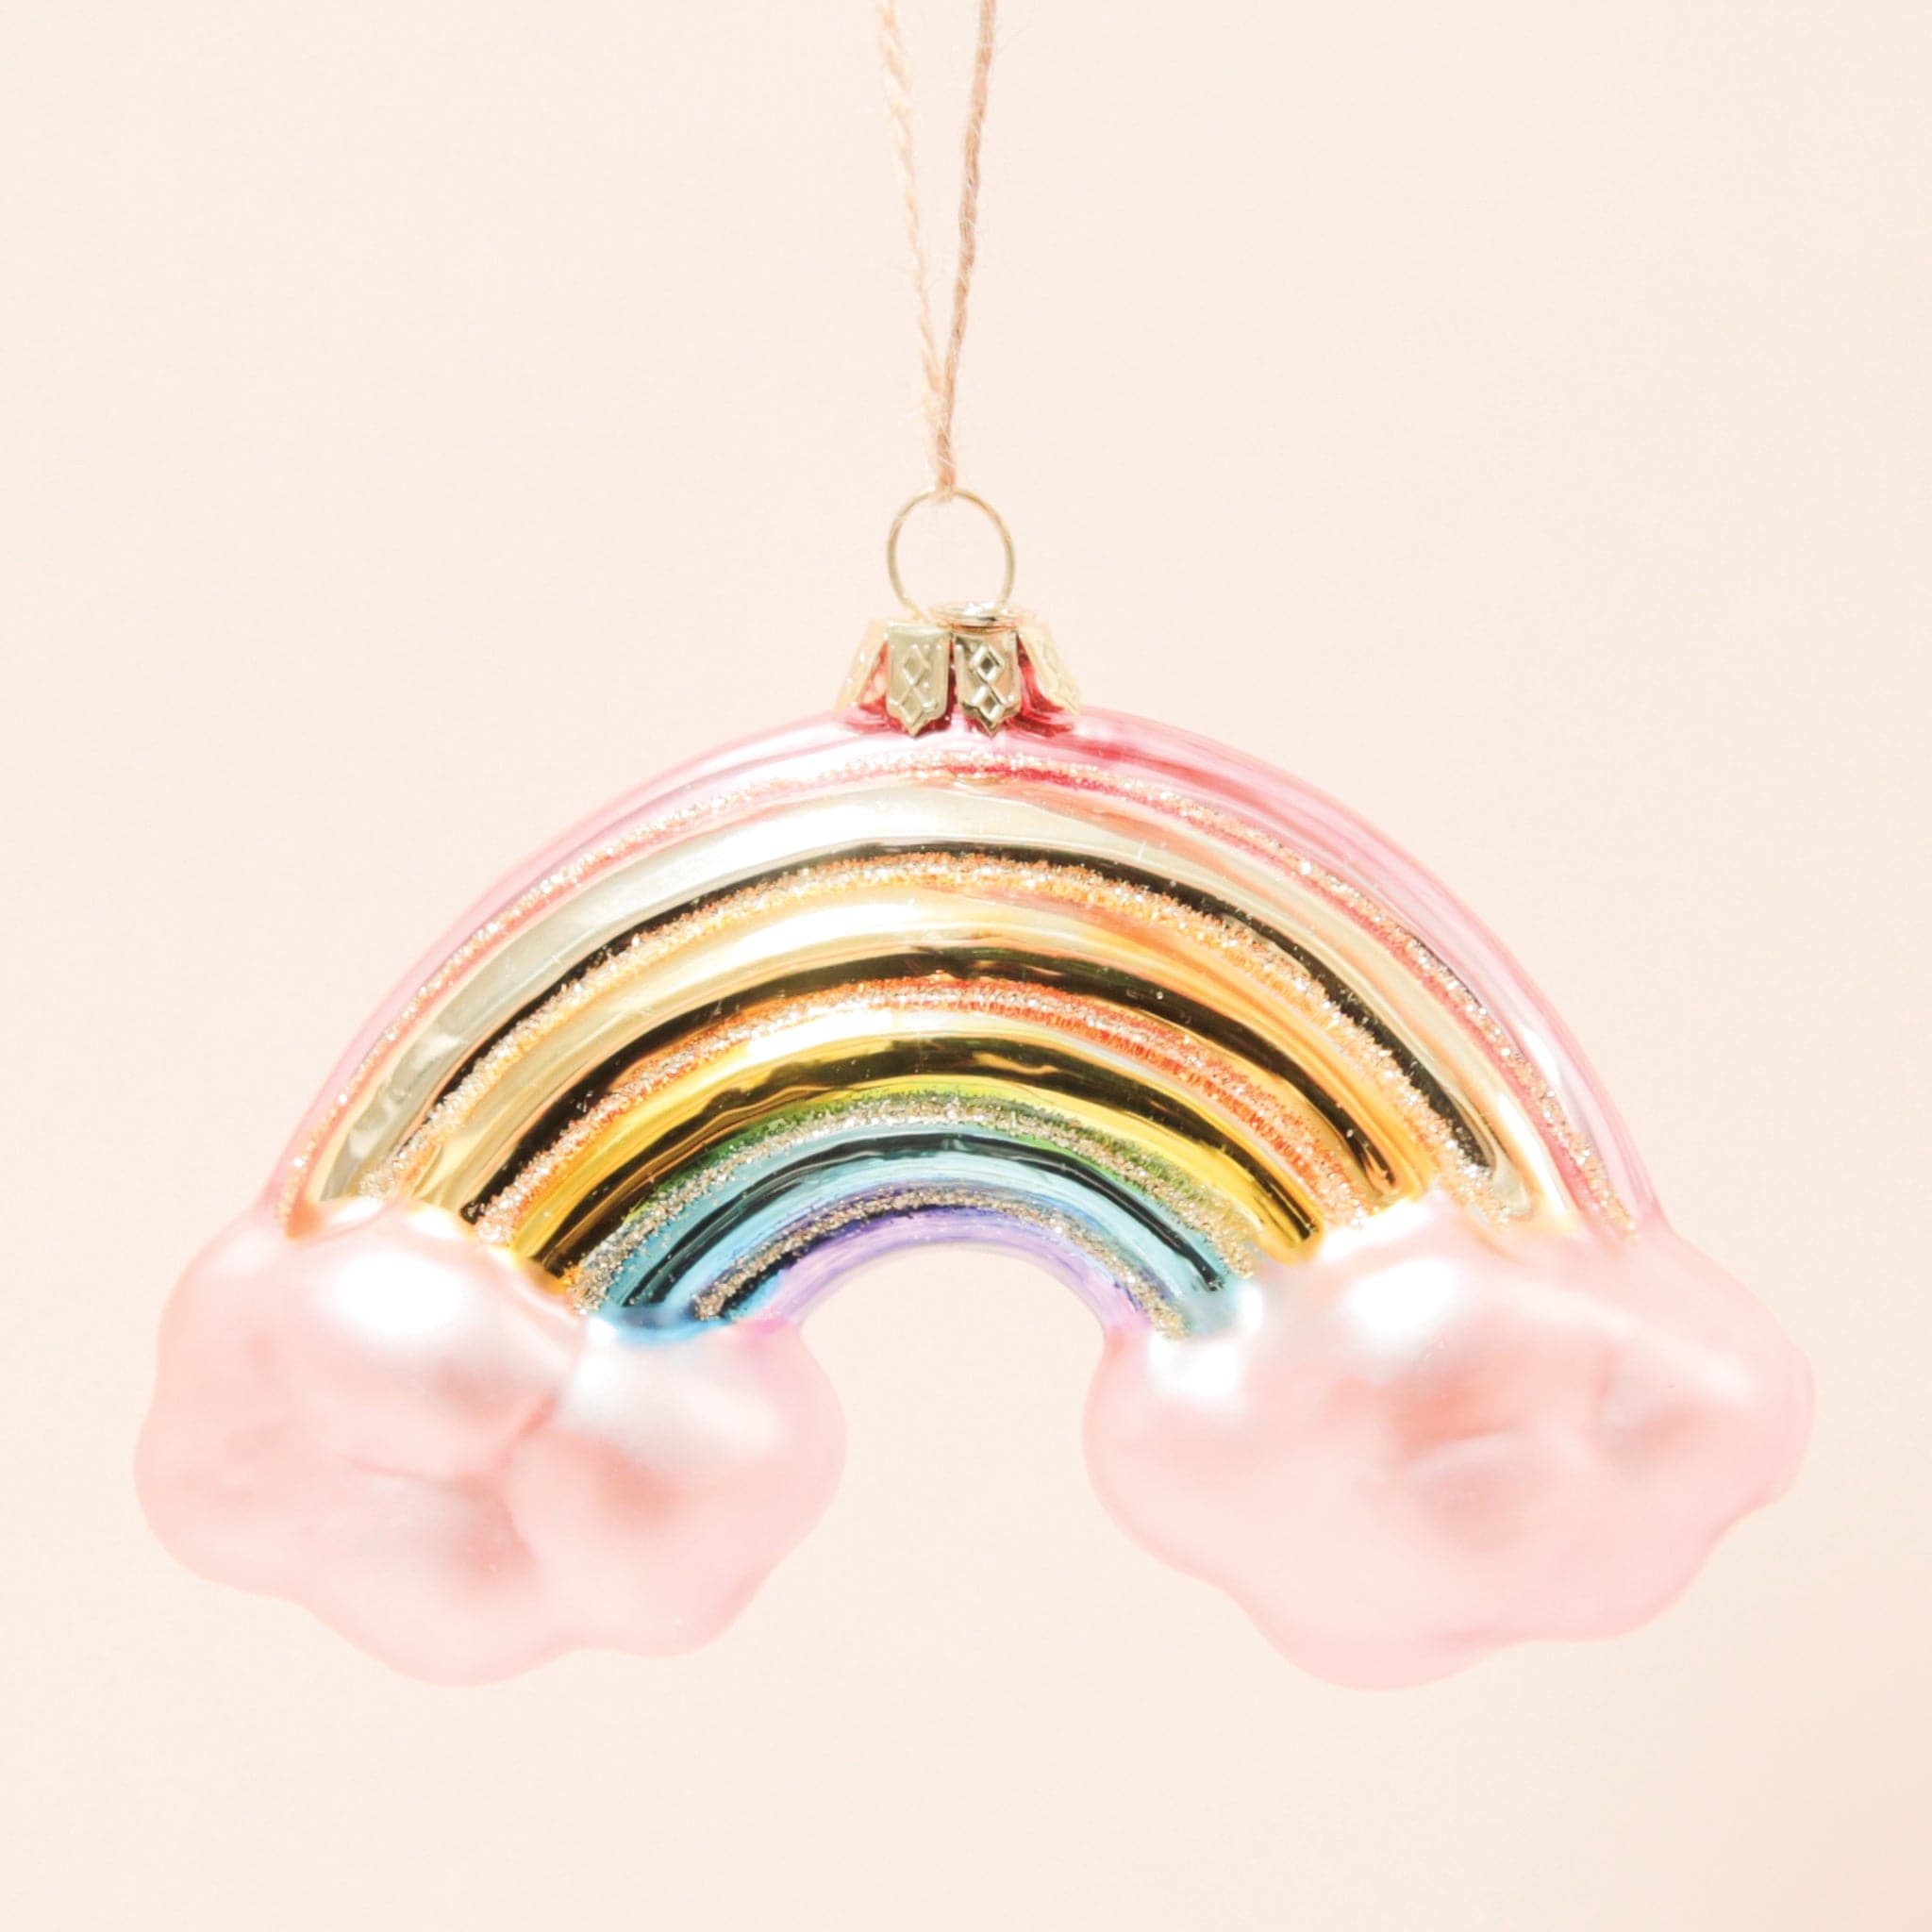 In front of a peachy background is a glass rainbow ornament. There is a light pink cloud on each end of the rainbow. The colors of the rainbow are red, orange, yellow, green, blue and purple. There is gold glitter in between each color. At the top of the ornament is a gold hook with brown twine string.